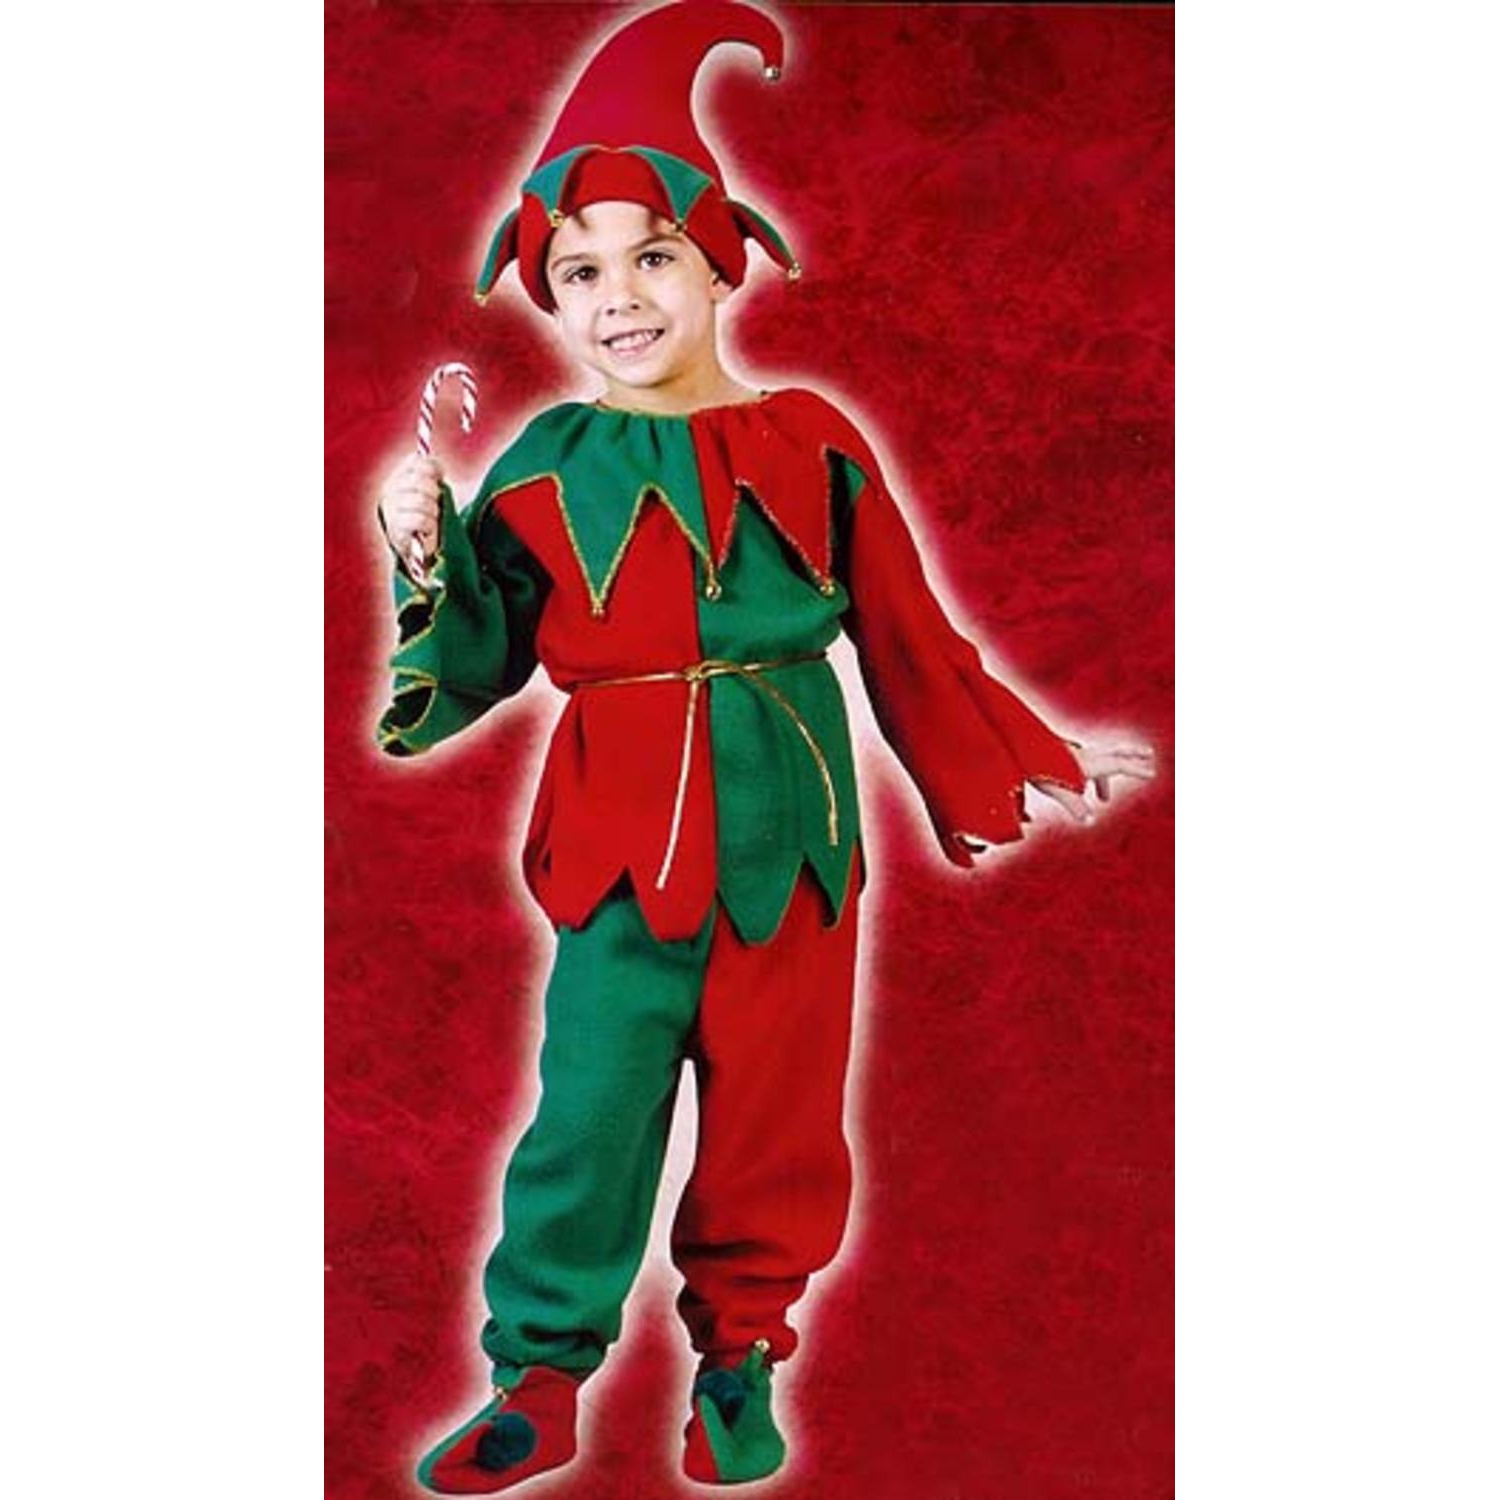 Red and Green Elf Plush Unisex Child Christmas Costume - Small